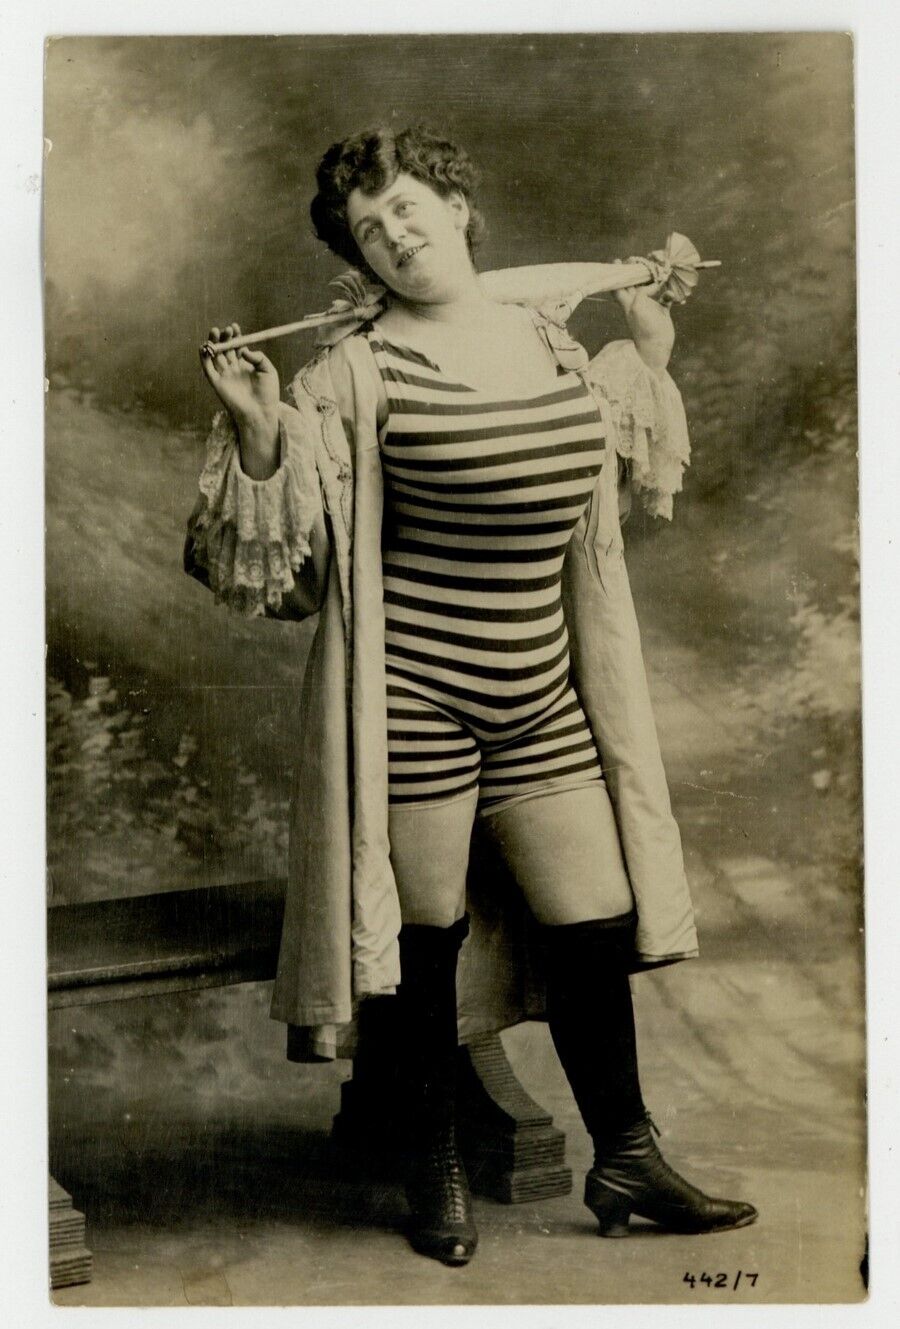 Risque Chunky Female 1900 Swimsuit RPPC Thick Boobs Stockings Vintage Prostitute